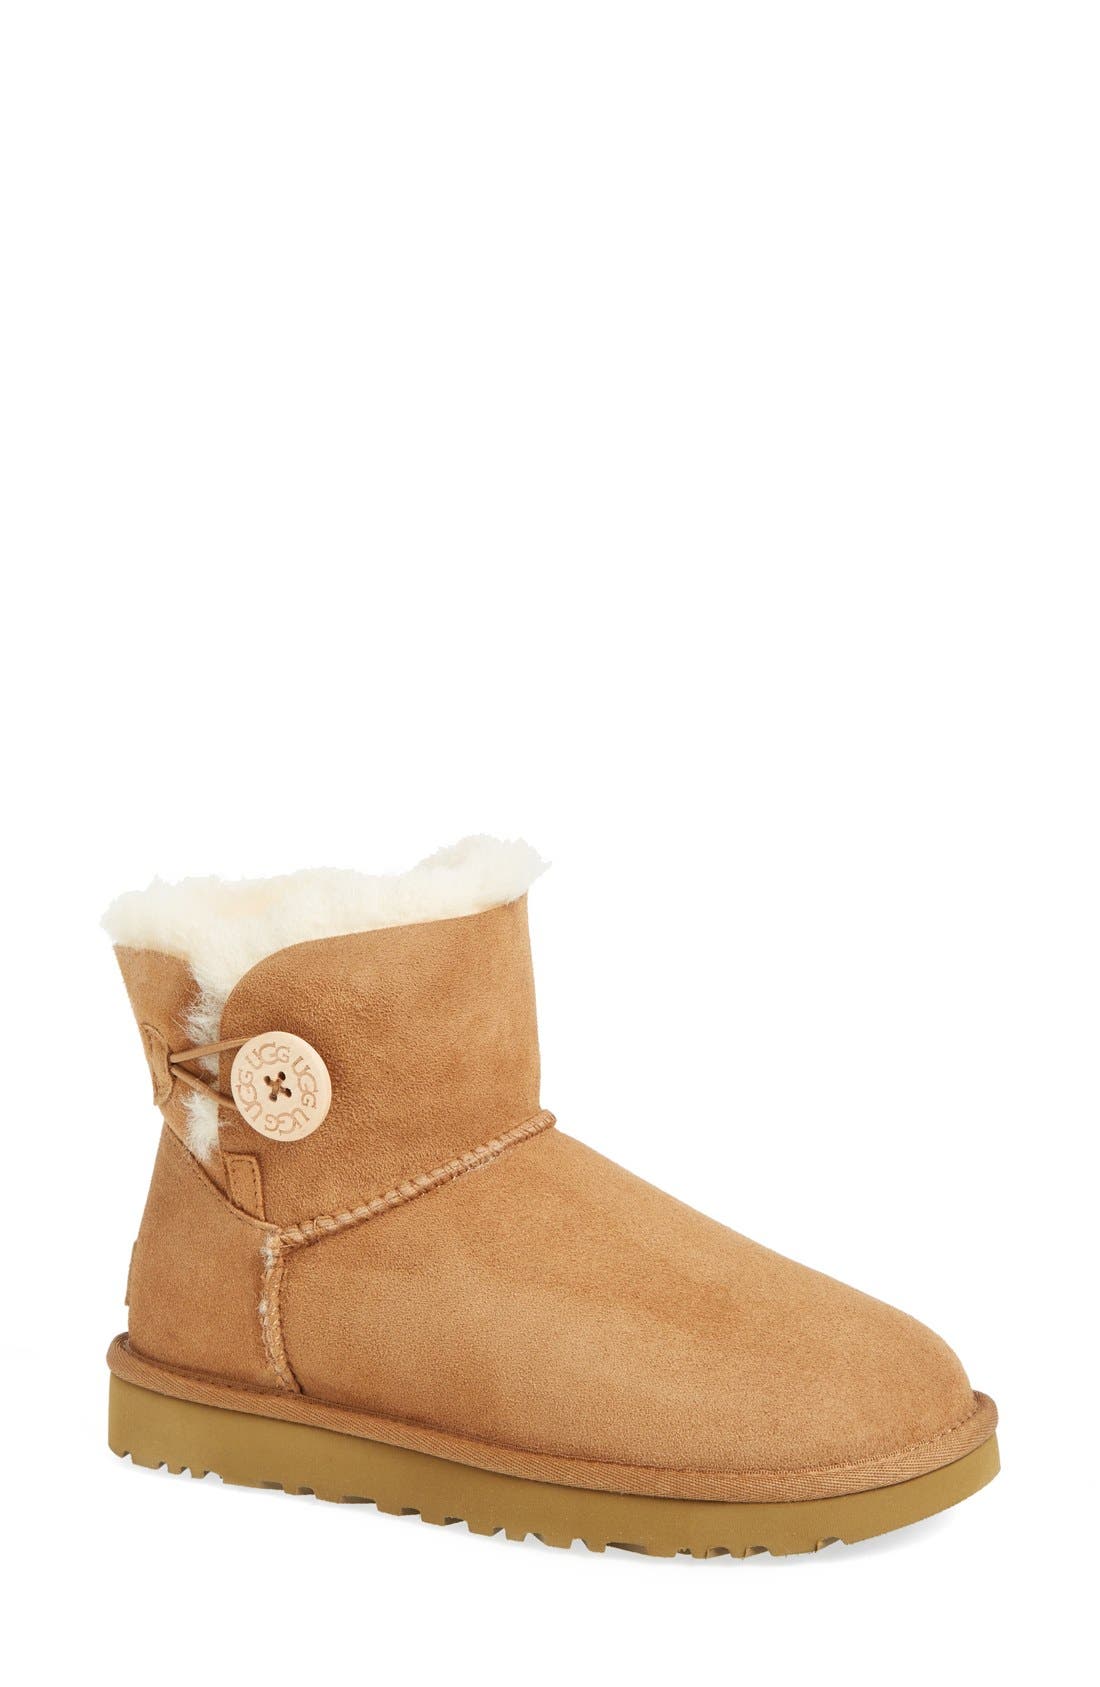 ugg bailey button ii boots chestnut suede